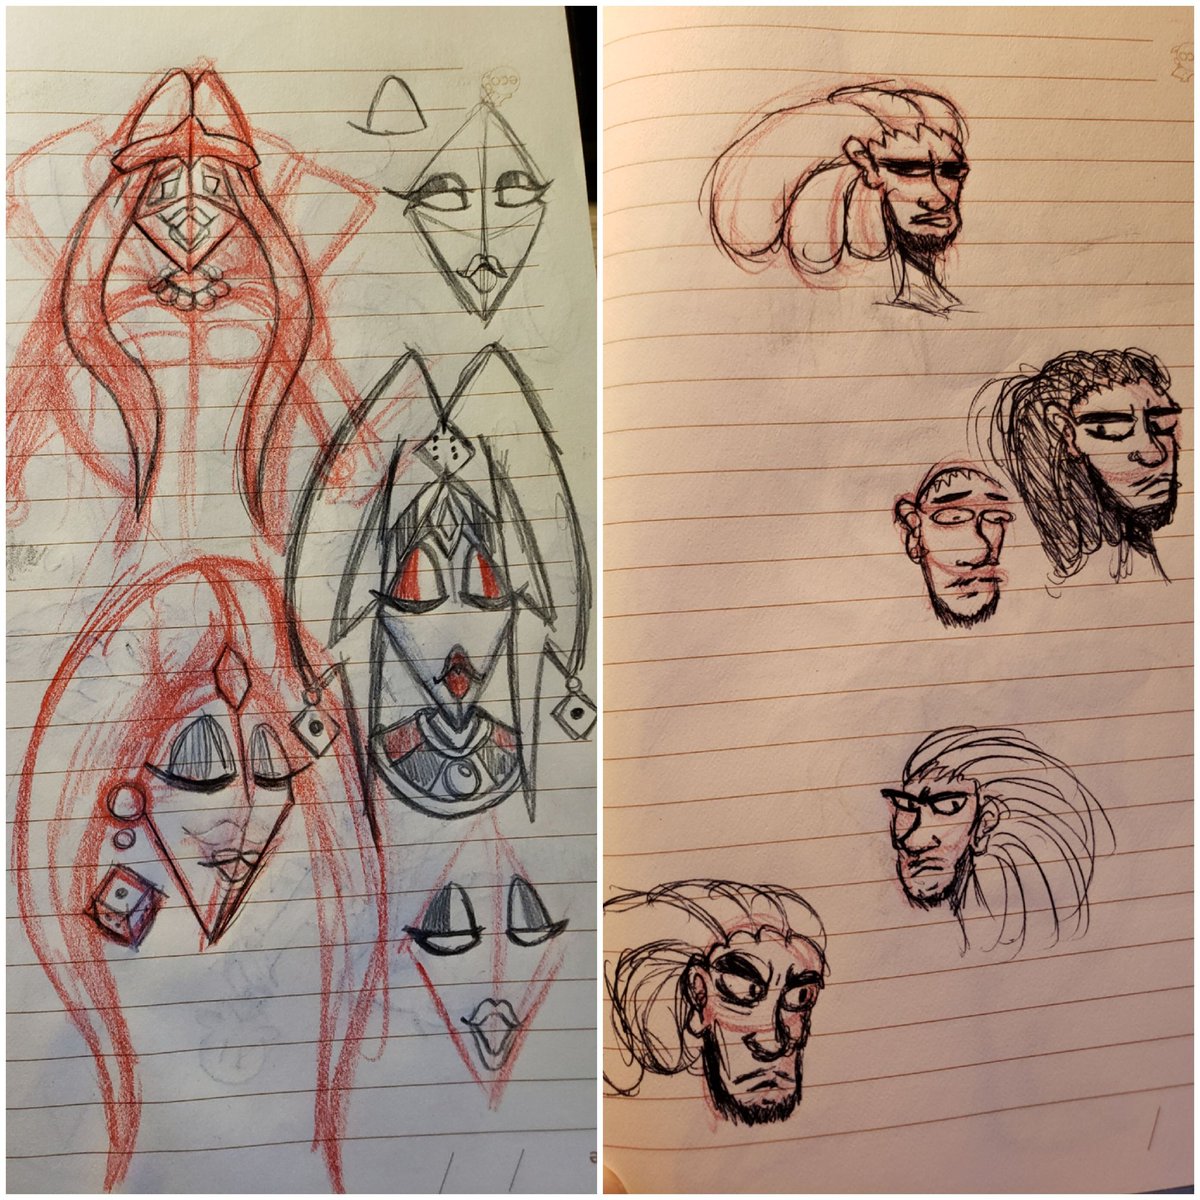 11. Not missing much here

Scuffed Jozer doodles

Character concept, (potentially scrapped) Gazer Maiden design

Lady Luck's initial concepts, another character concept

Gollygins, scrapped version of the valentine's day piece with Striker G & Jozer, scuffed Garse sketch 